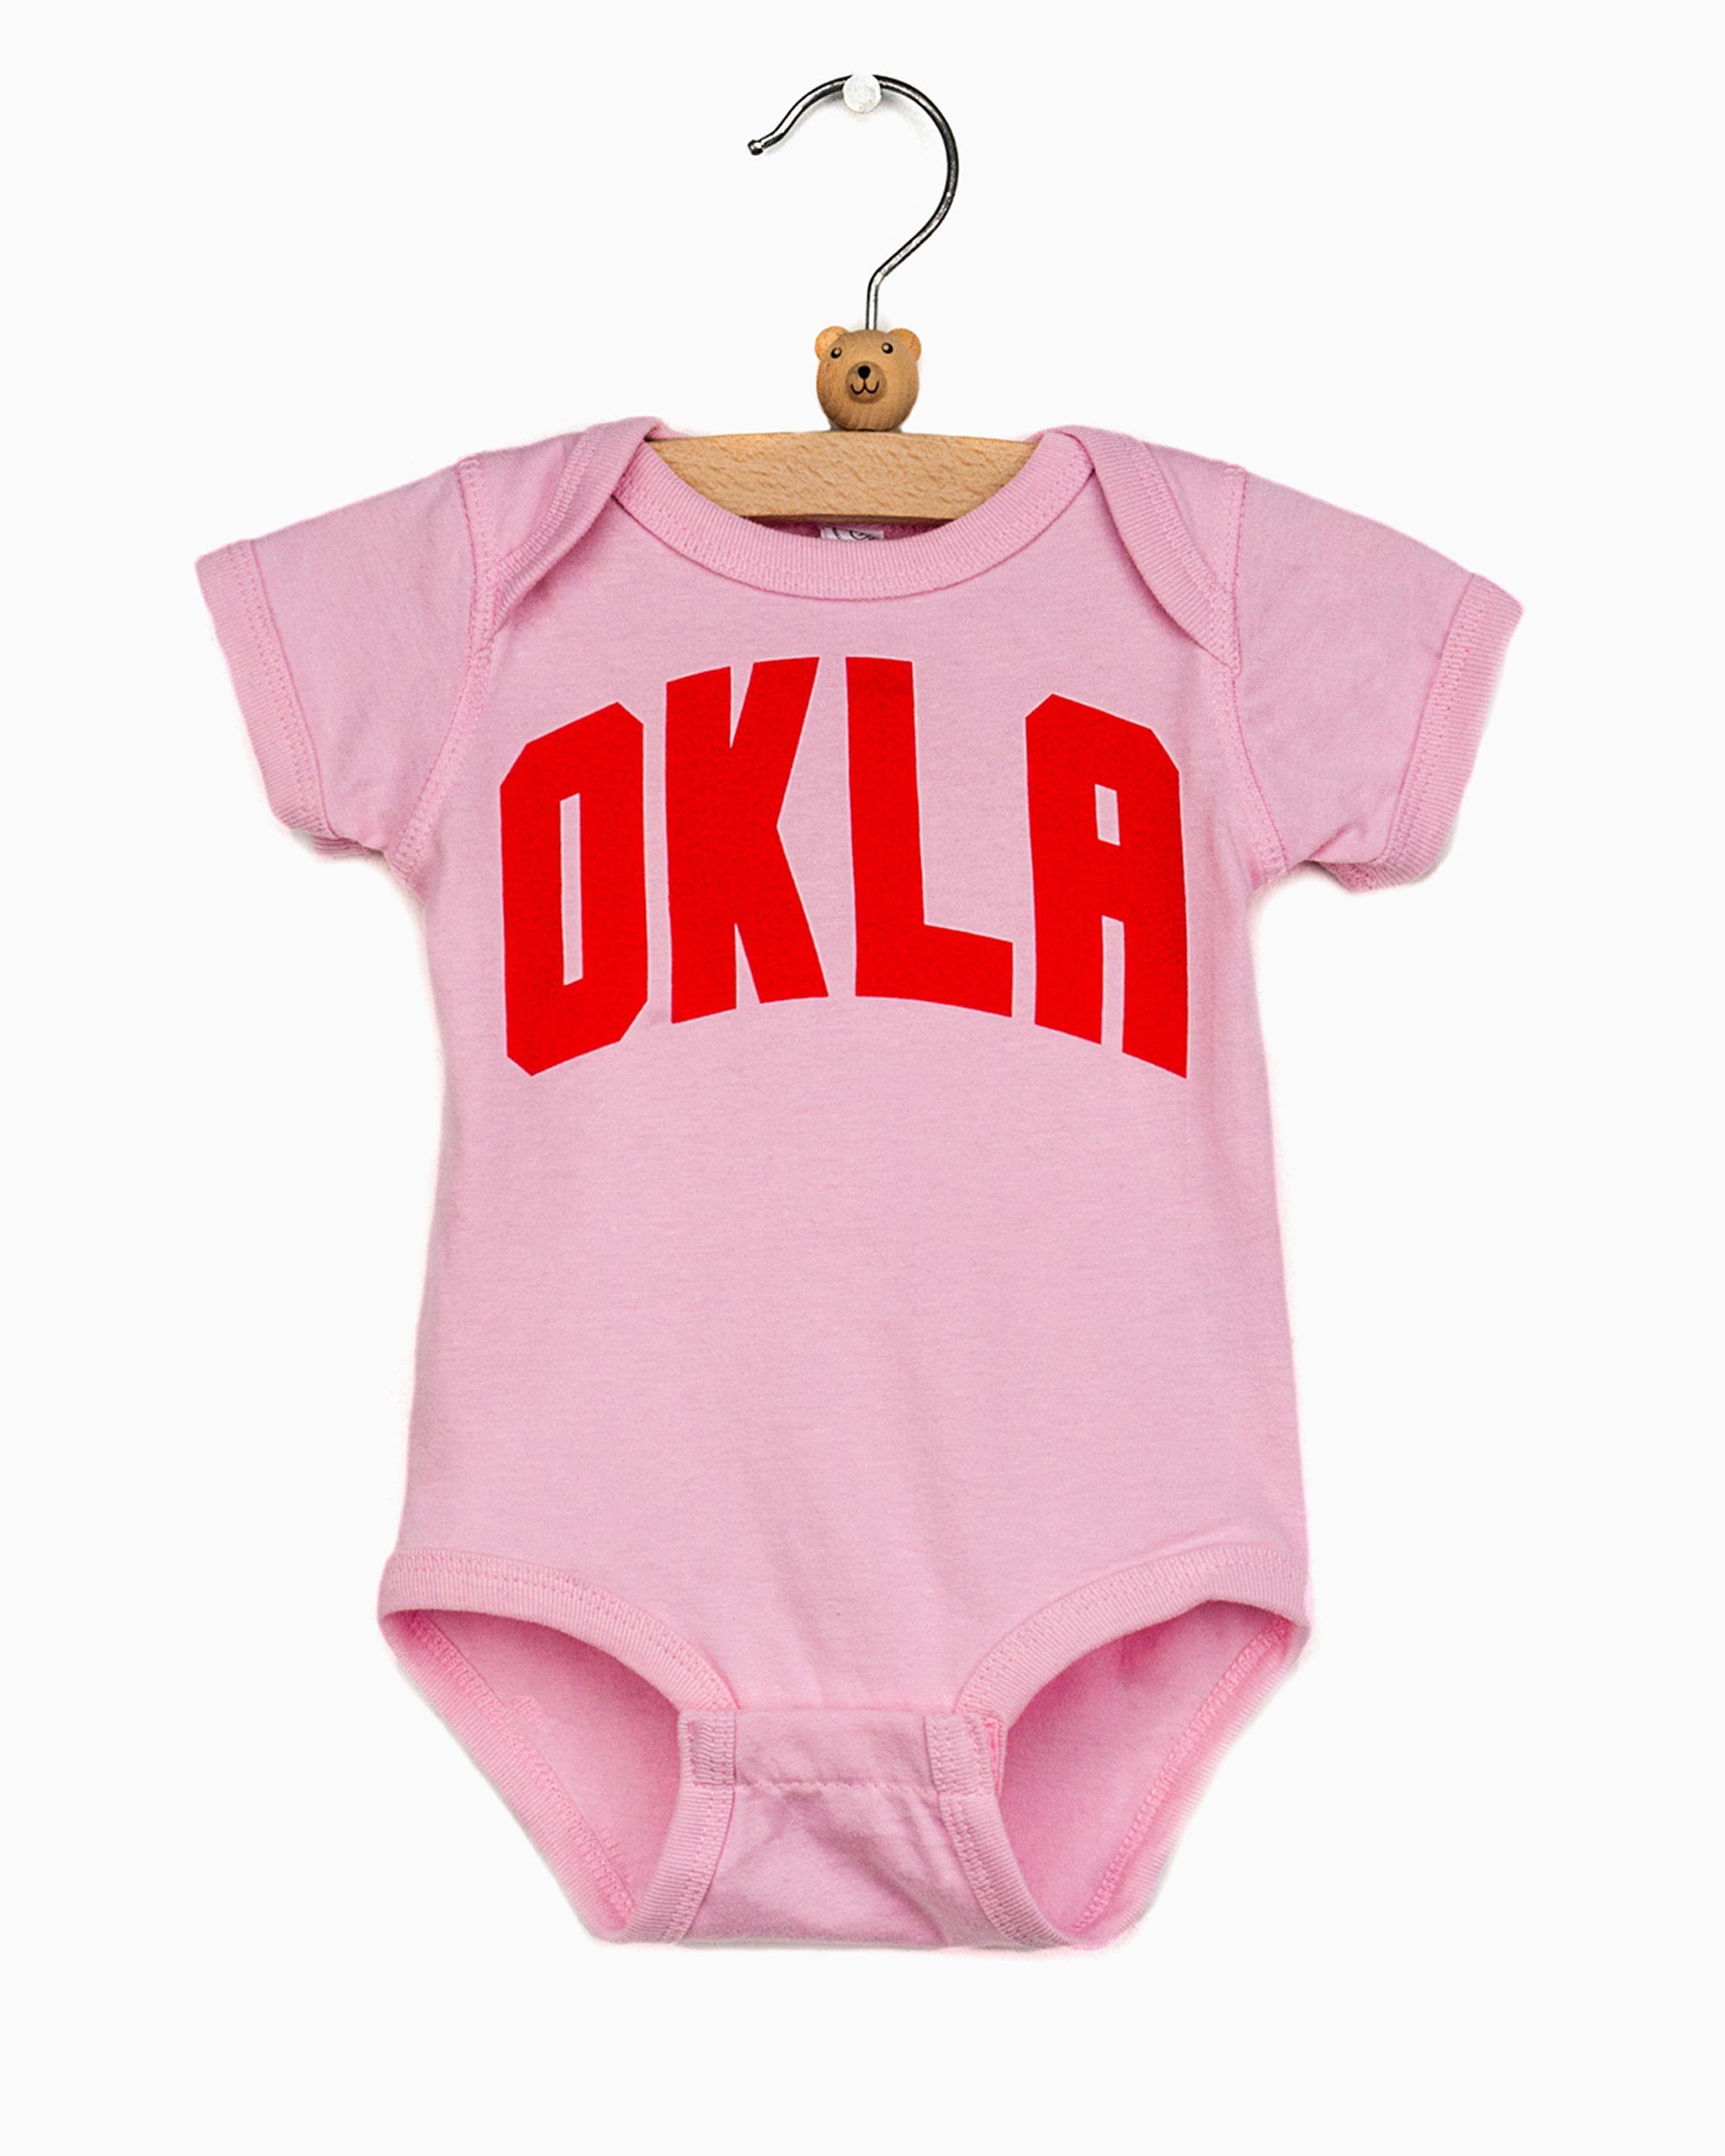 Children's OKLA Pink Onesie with Red Letters (4470722199655)